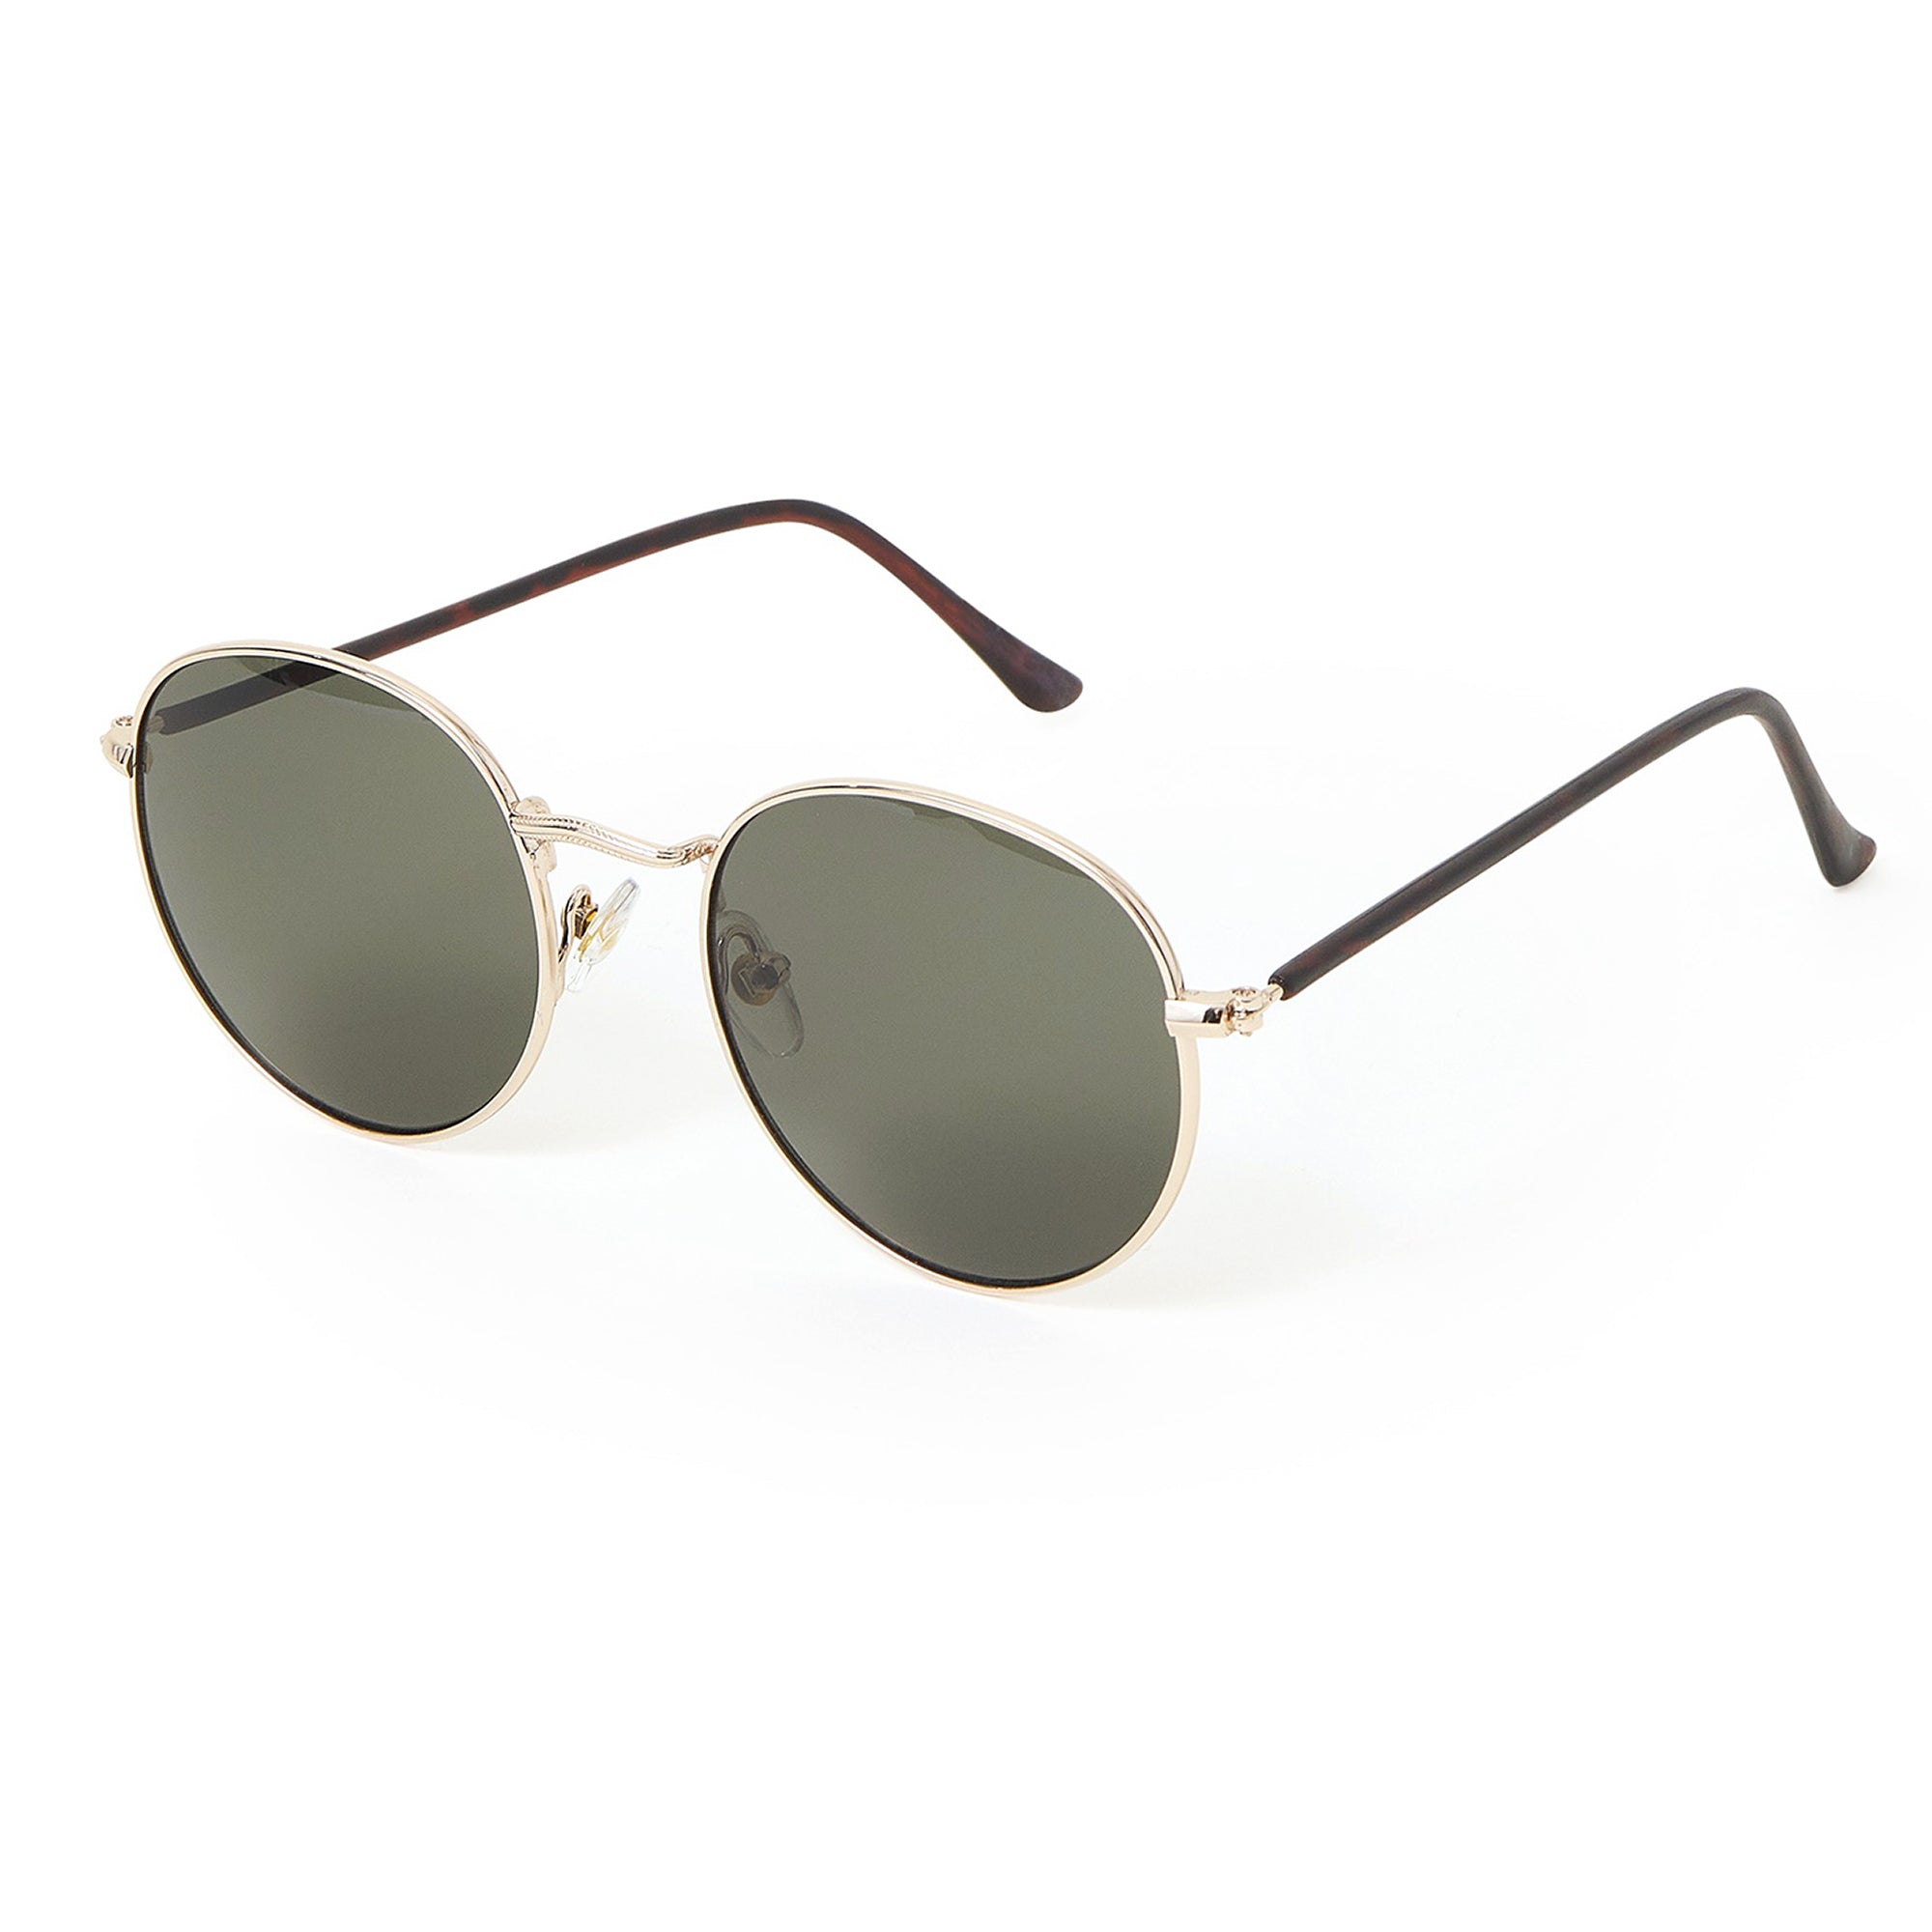 Women's Round Gold Metal Frame Sunglasses Features